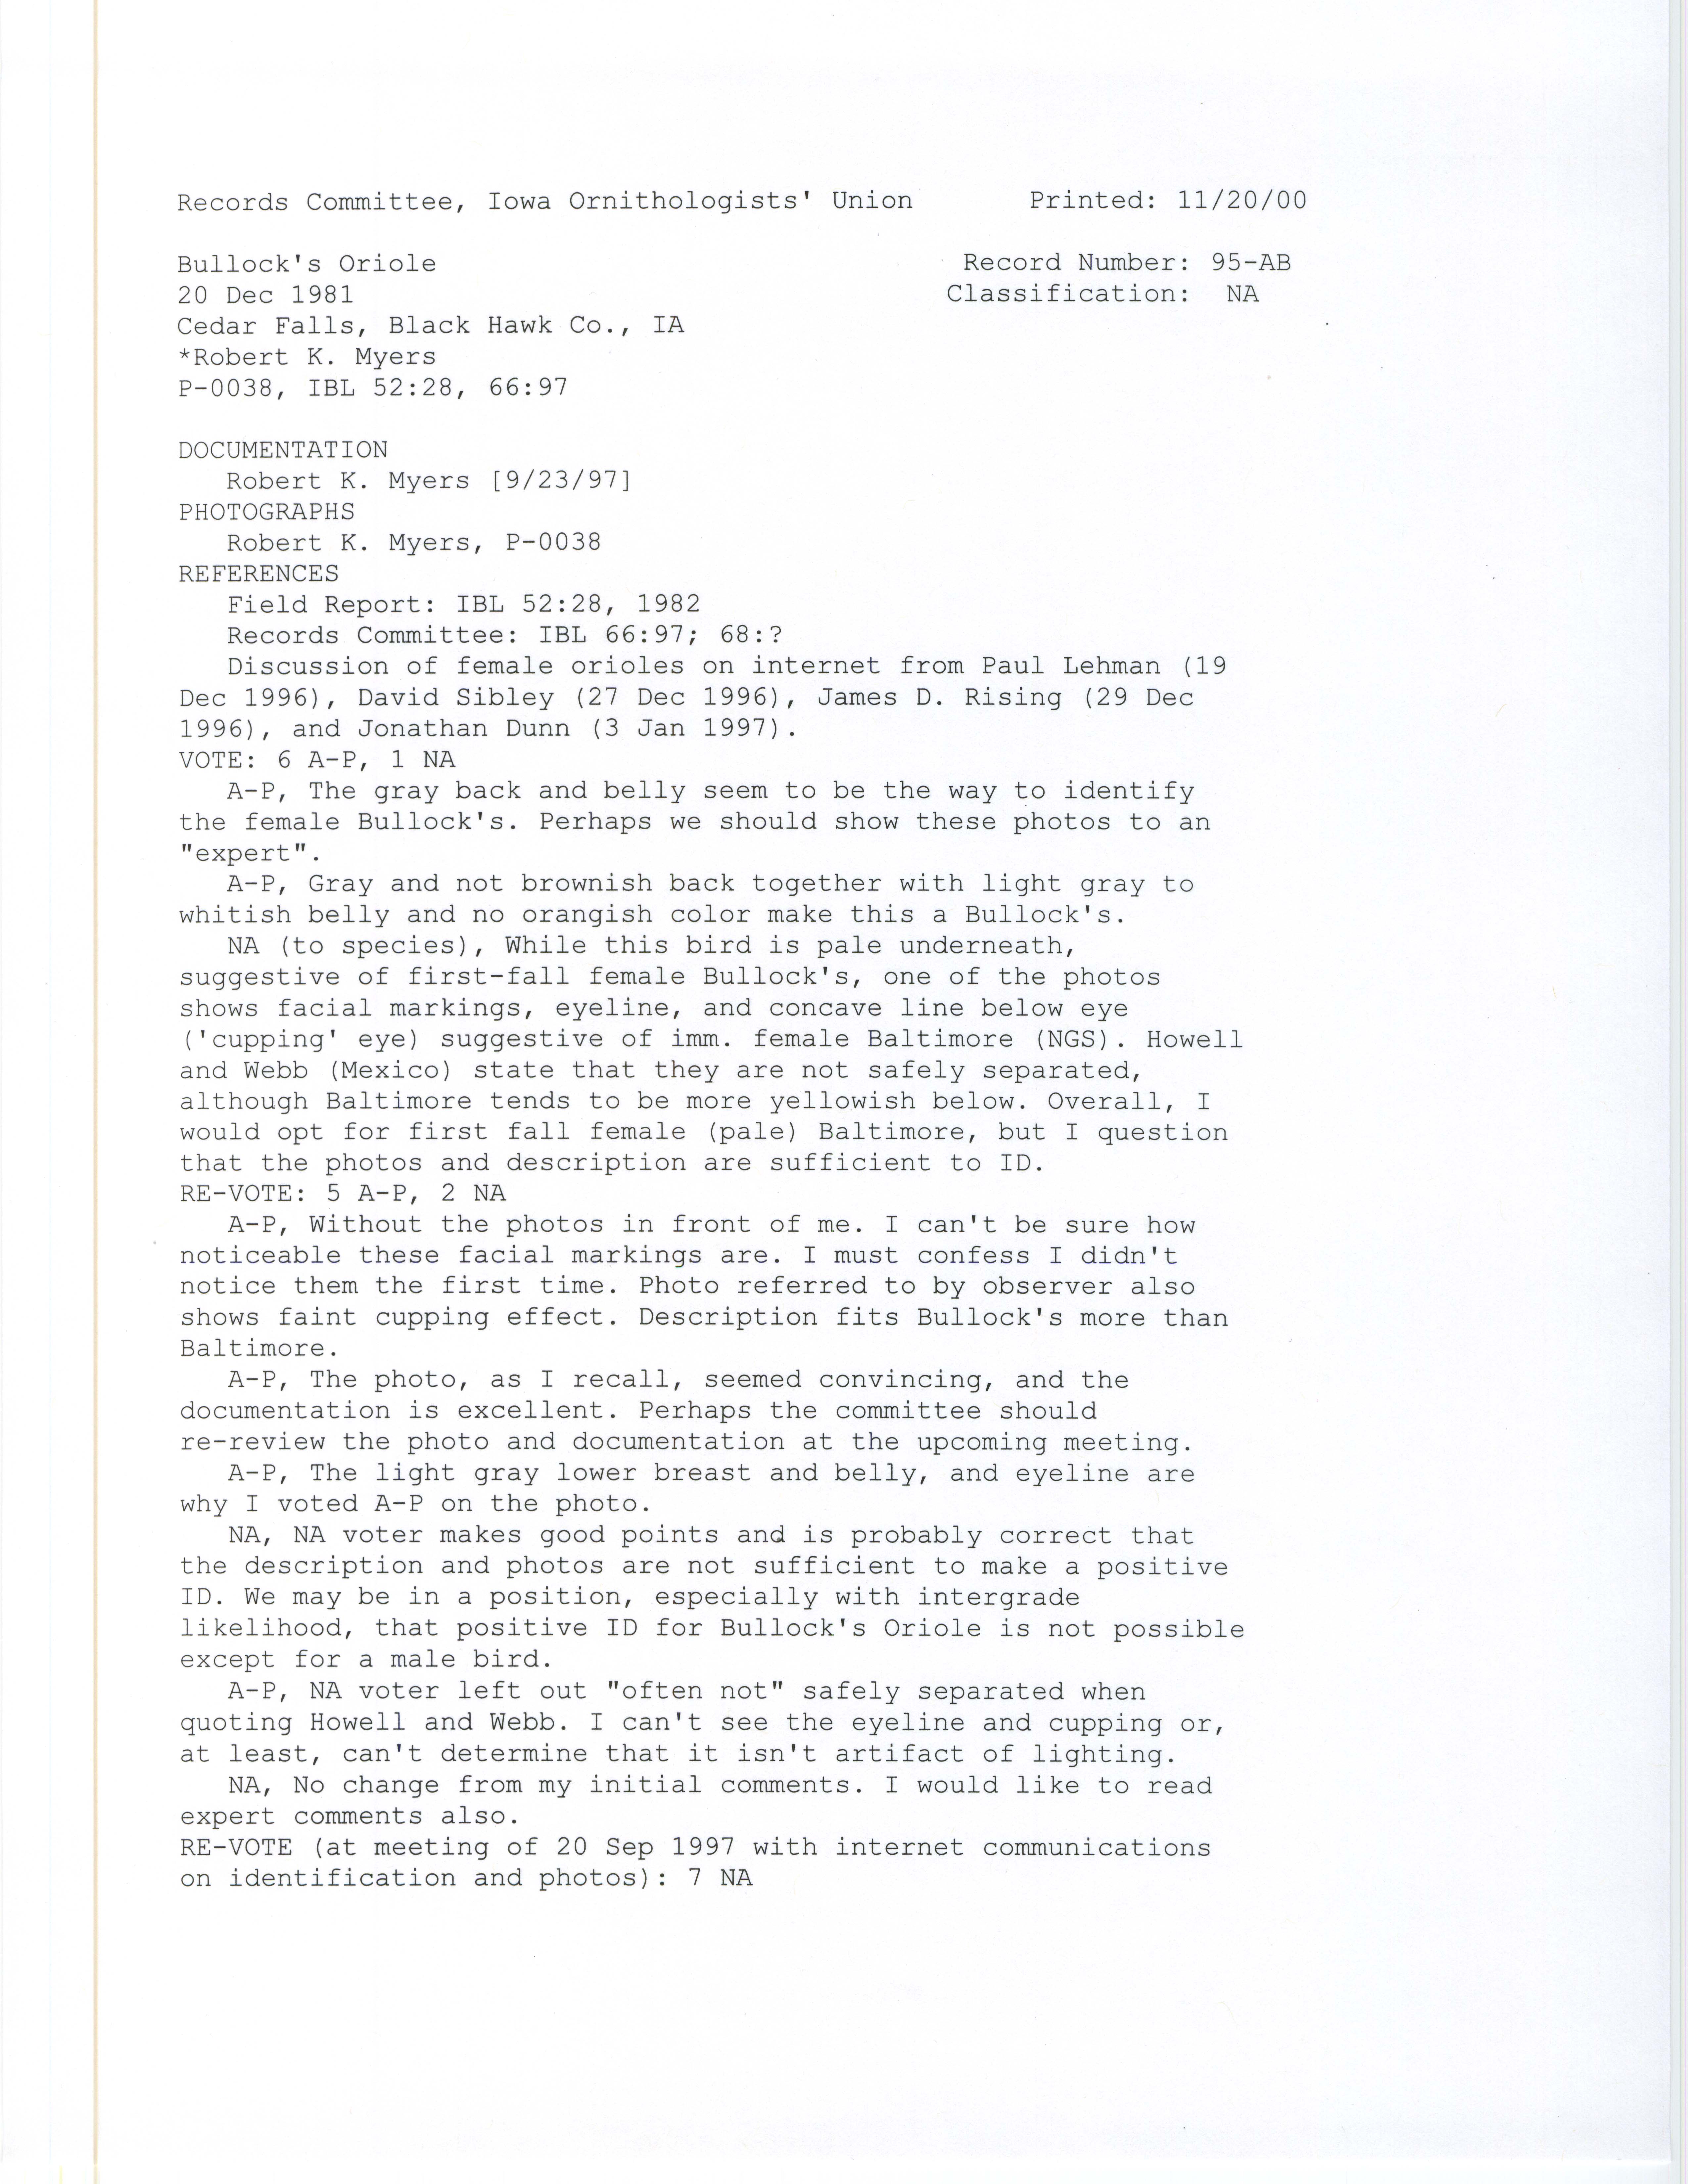 Records Committee review for rare bird sighting for Bullock's Oriole at Cedar Falls, 1981